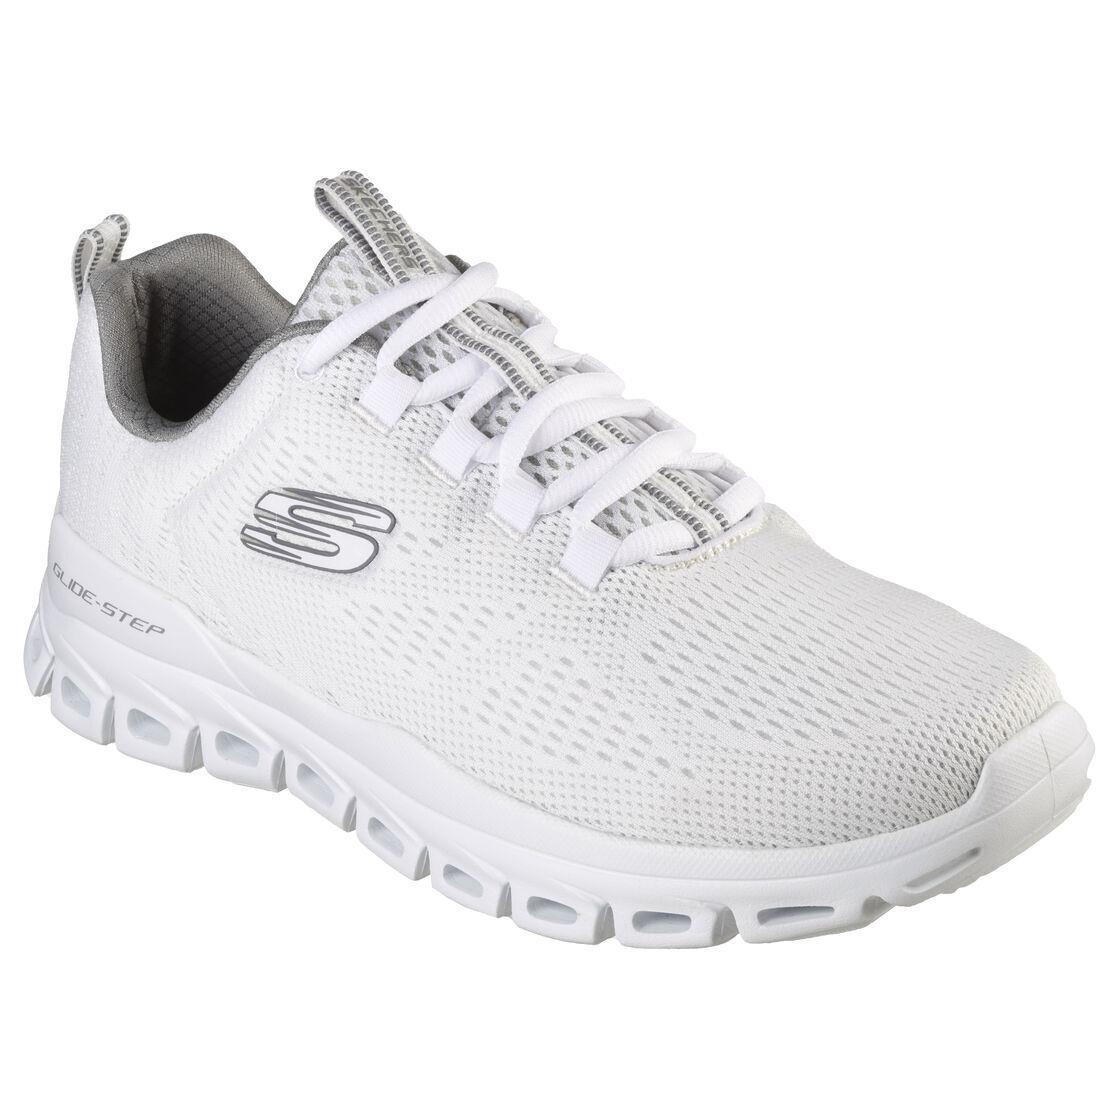 Man Skechers Glide Step Fasten Up Lace-up Shoe 232136 Color White